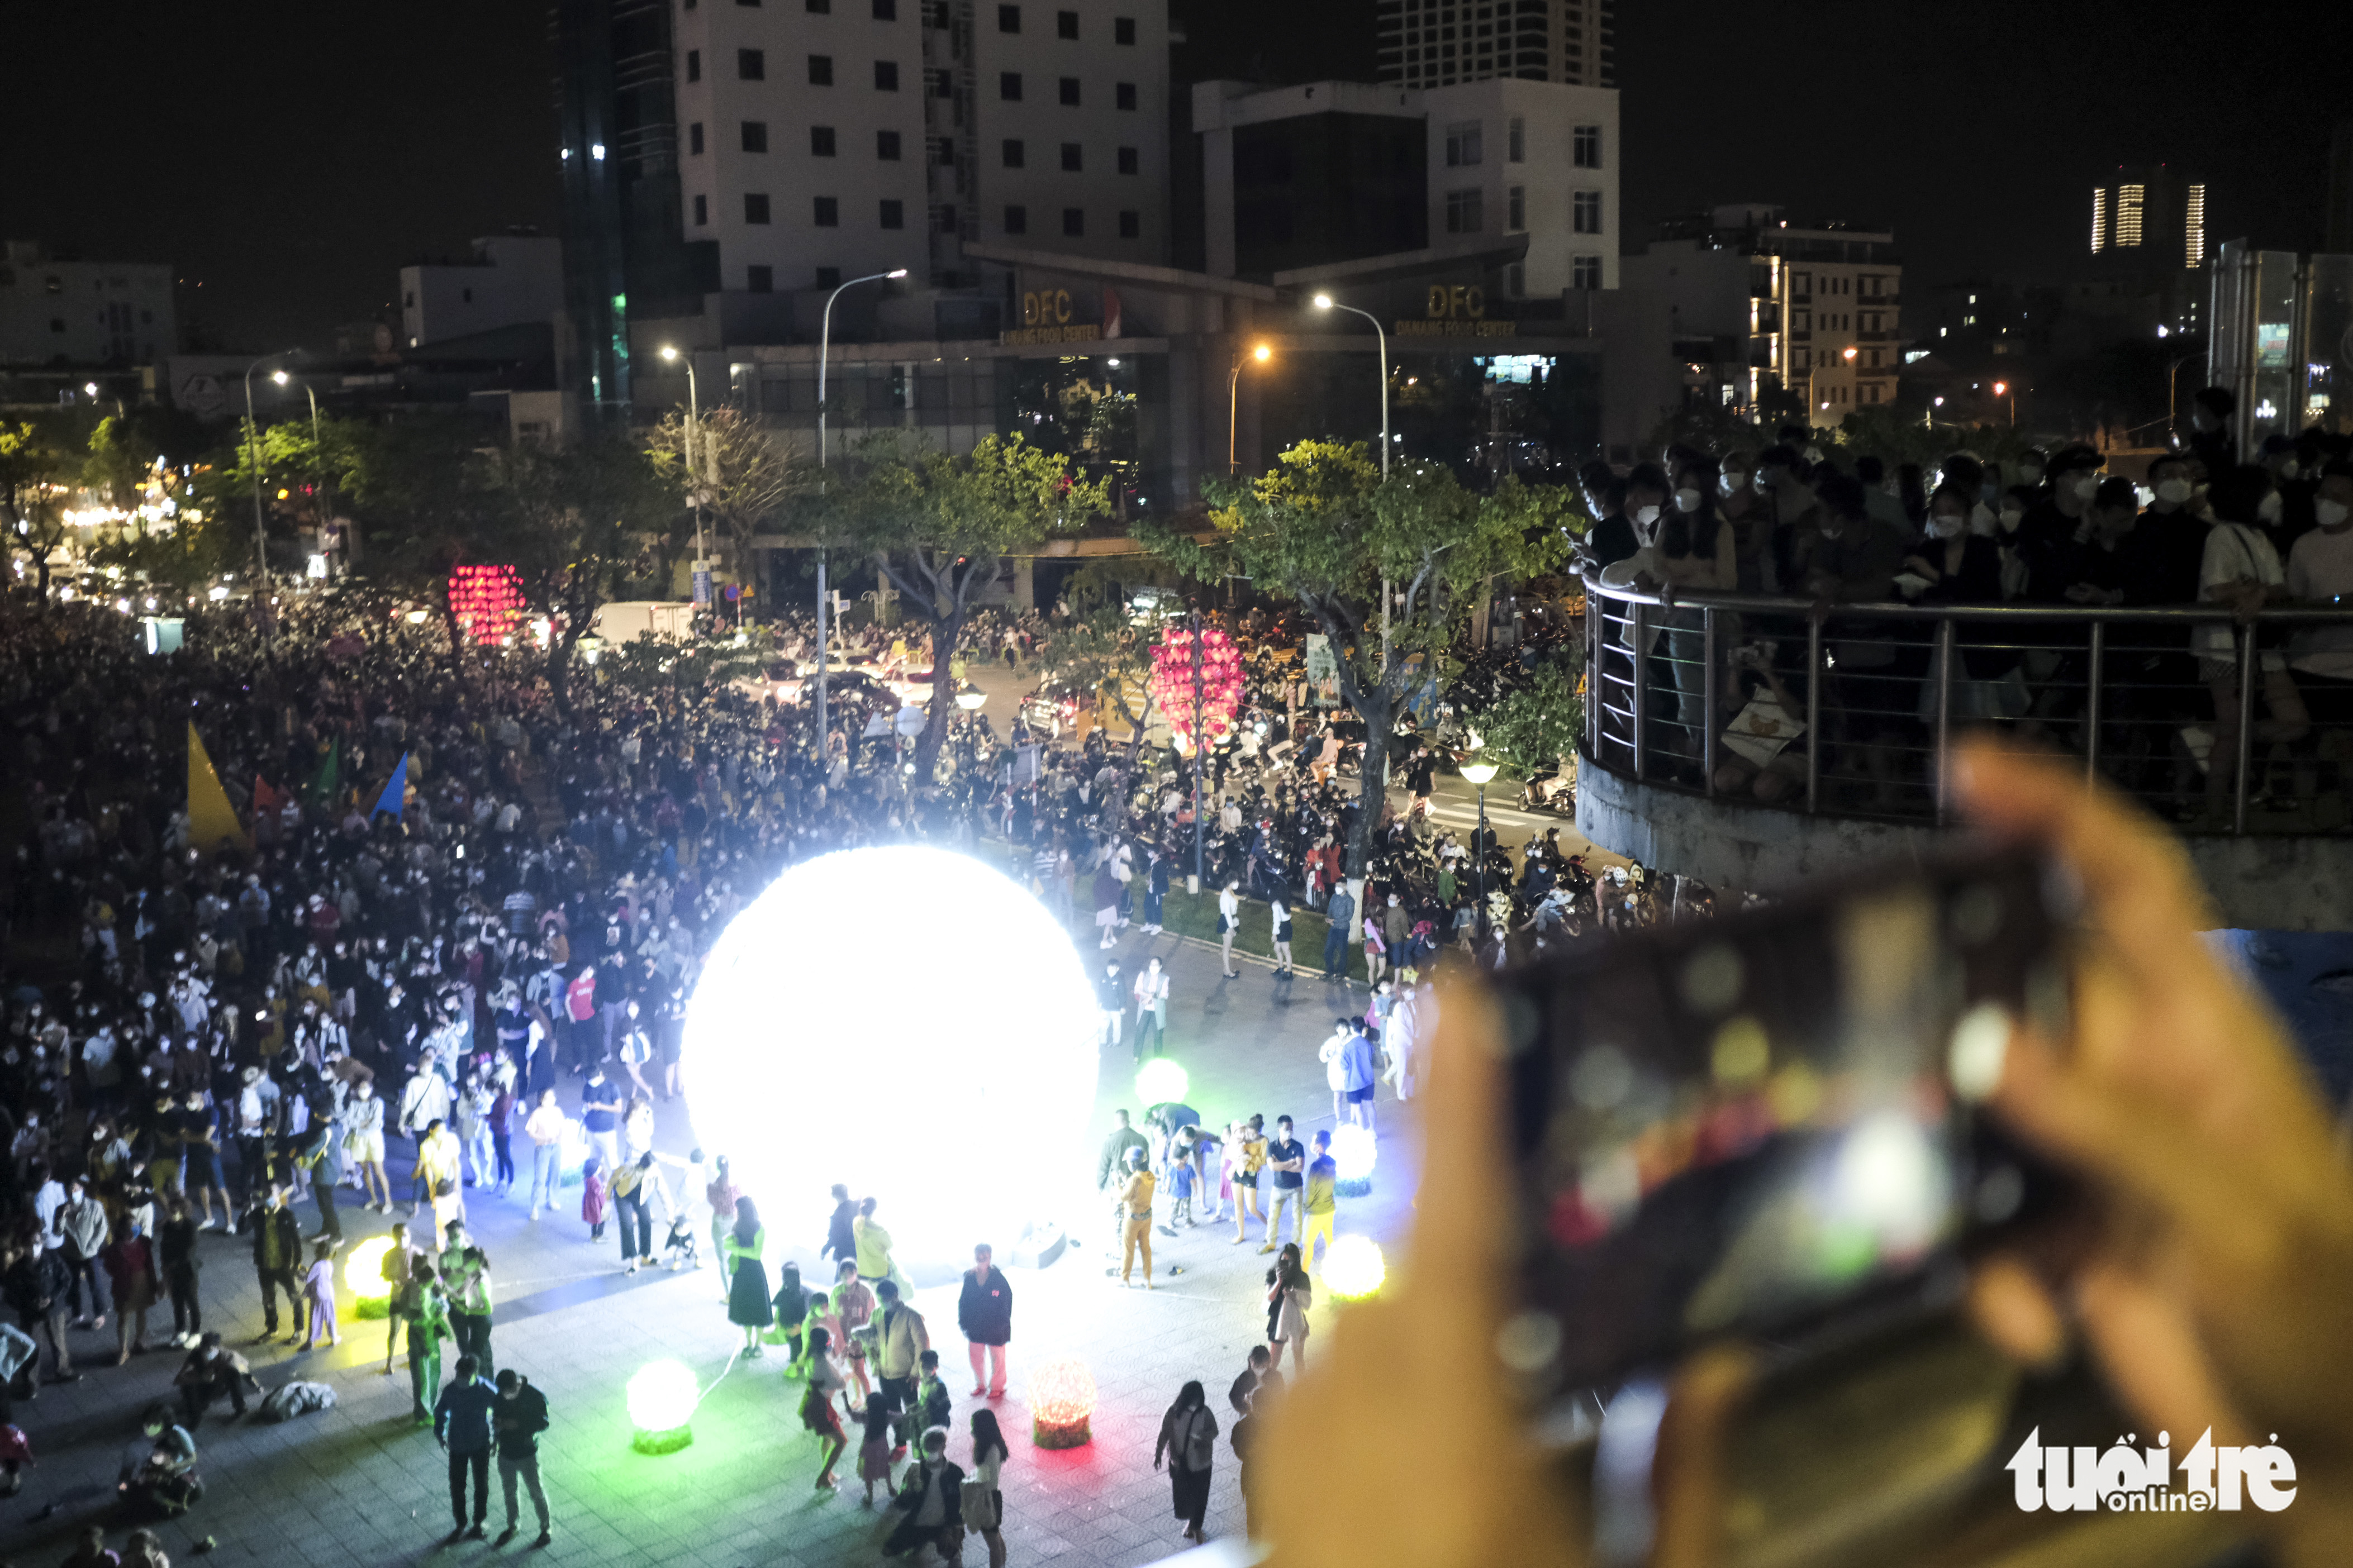 Thousands gather at a park near Dragon Bridge to witness the performance in Da Nang City, Vietnam, February 12, 2022. Photo: Tan Luc / Tuoi Tre